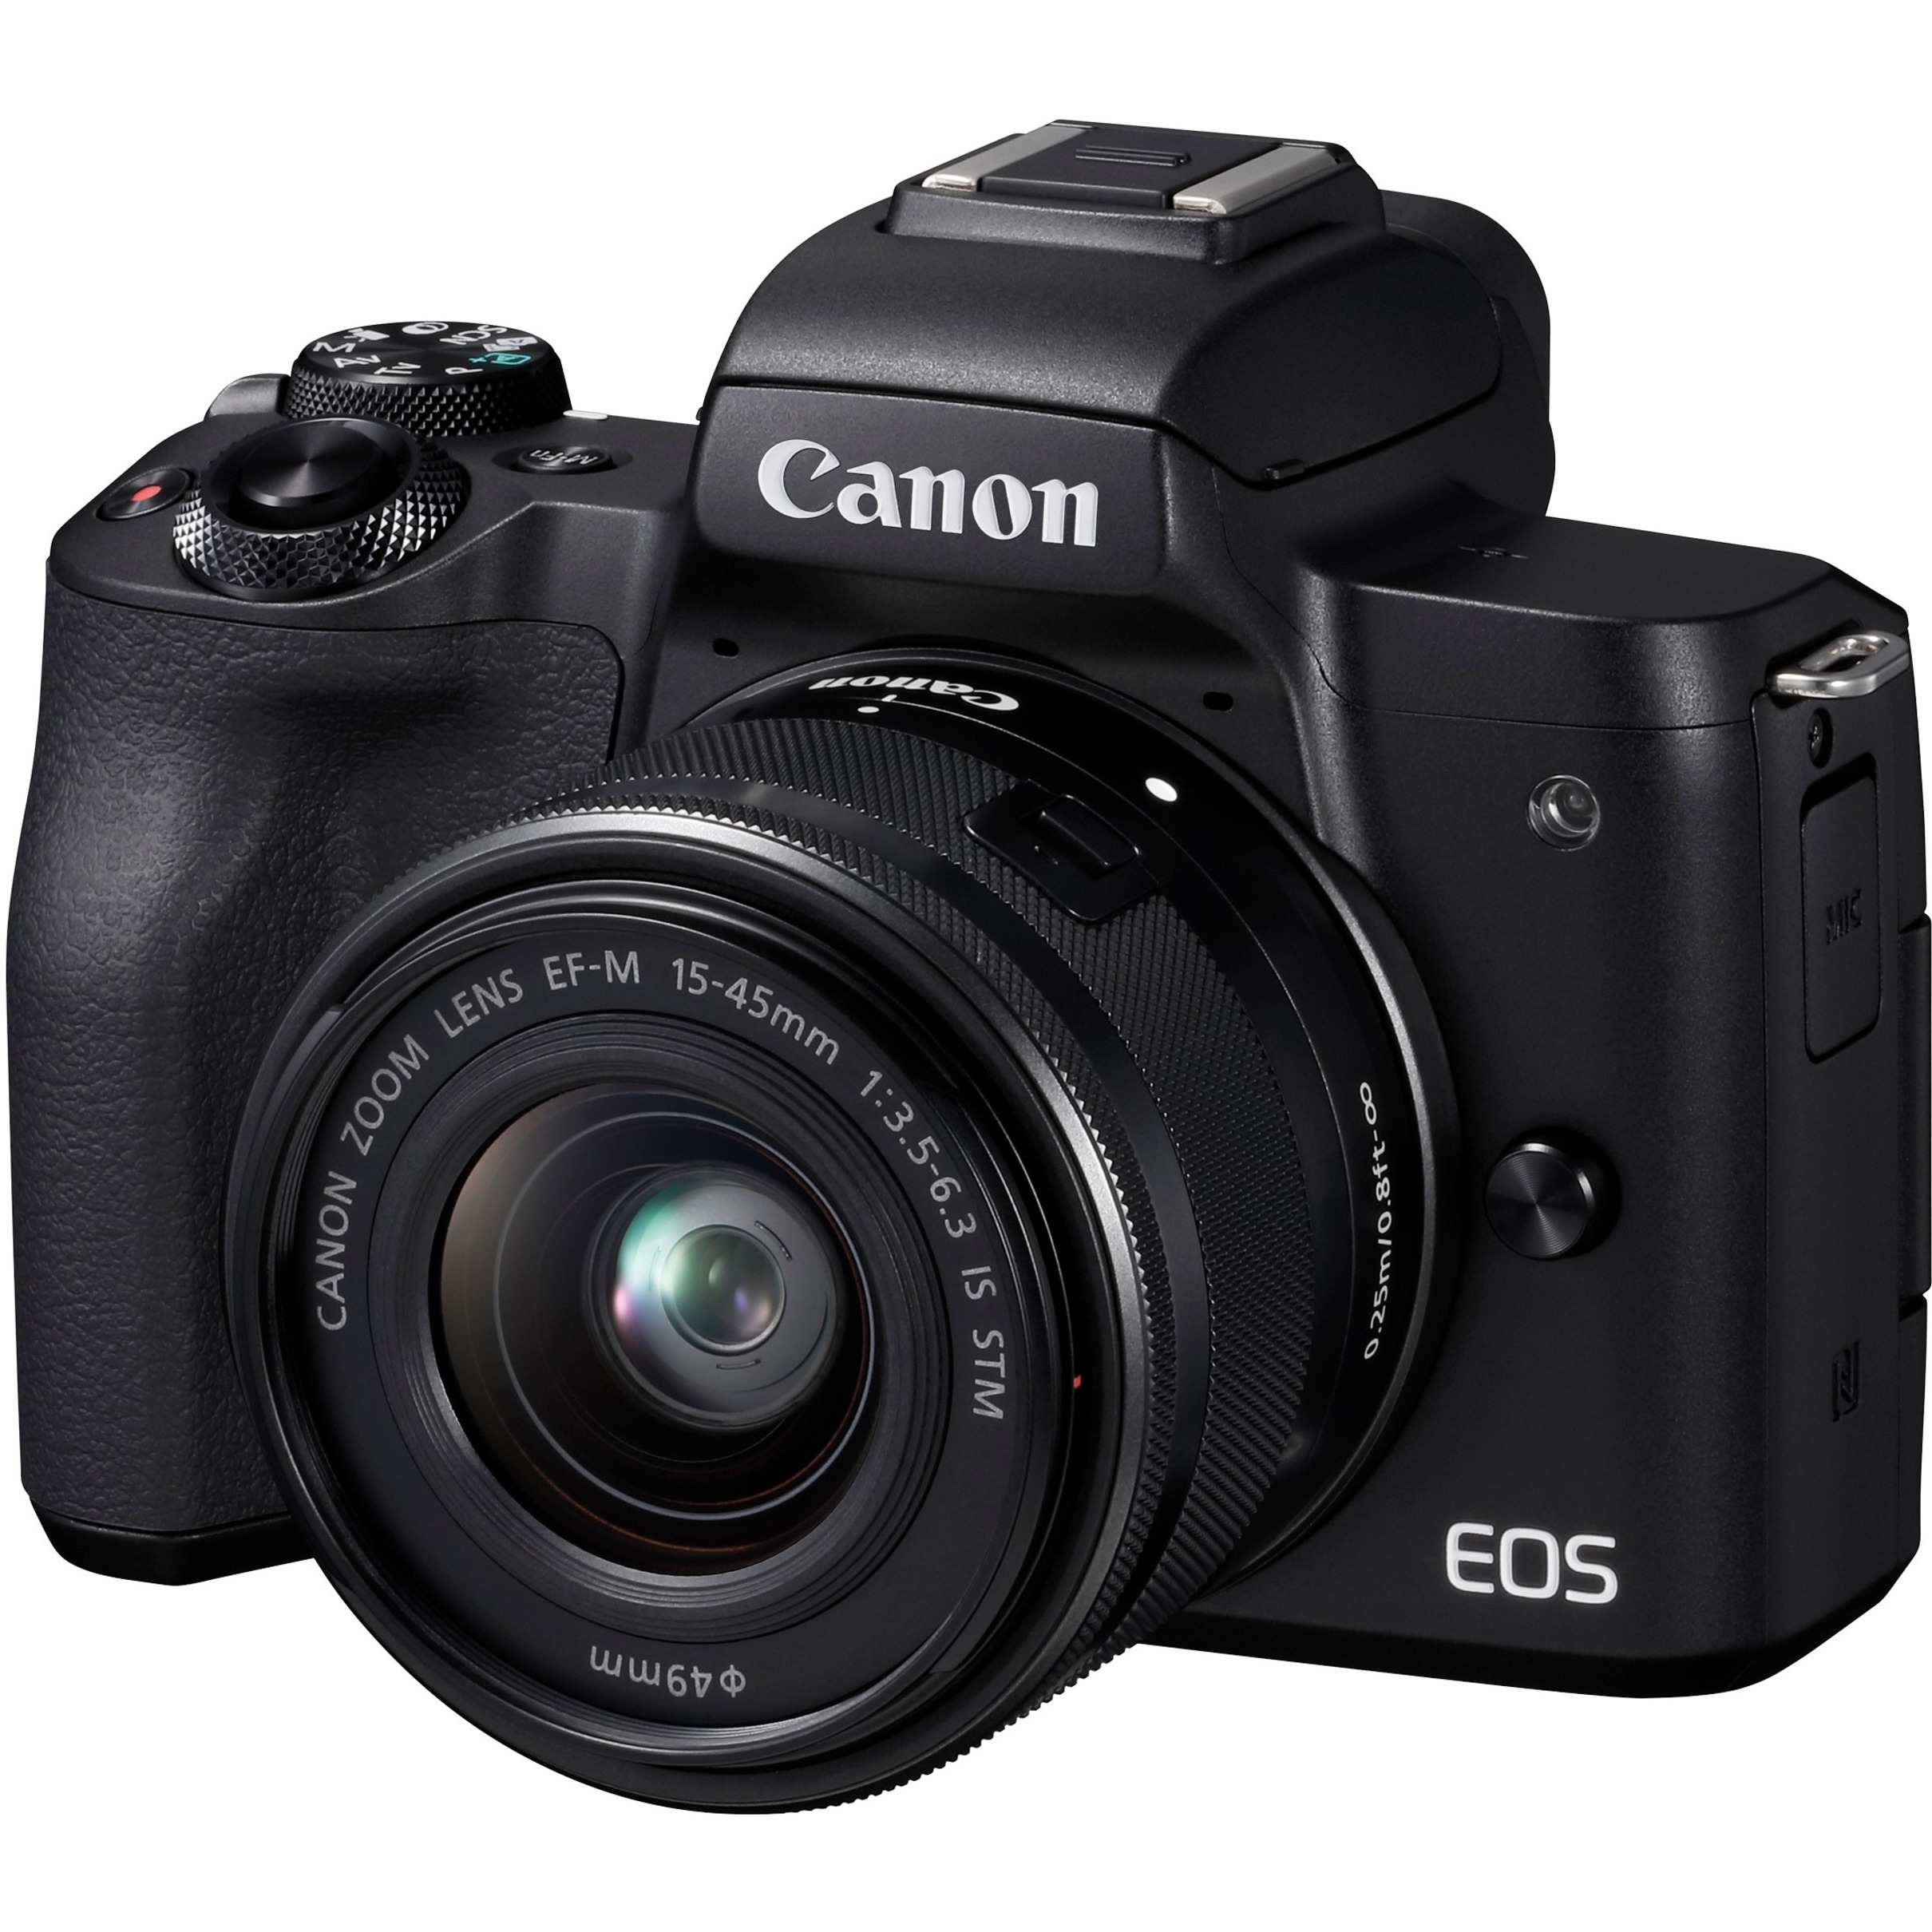 Canon EOS M50 24.1 Megapixel Mirrorless Camera with Lens, 0.59", 1.77", Black - image 2 of 11